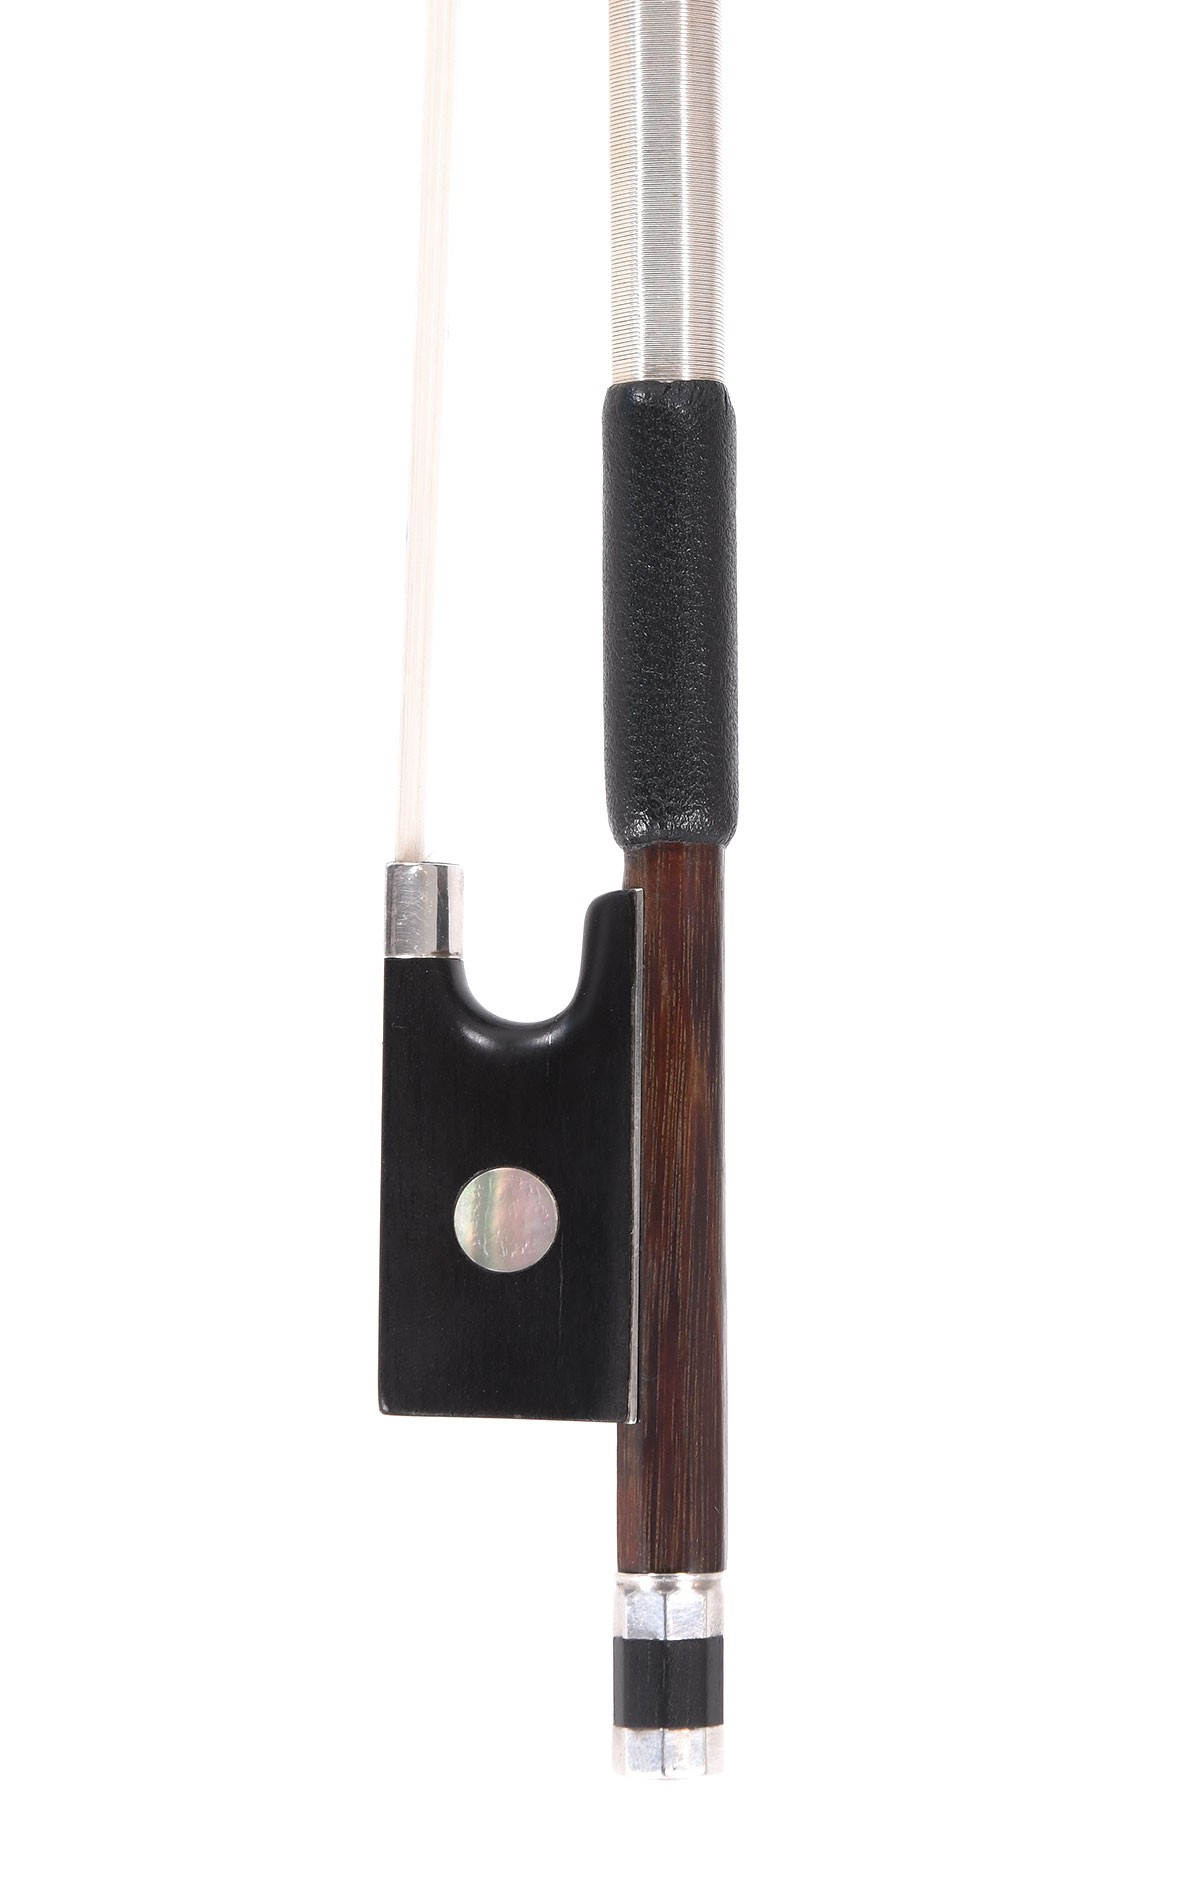 Fine violin bow by Richard Weichold, late 19th century